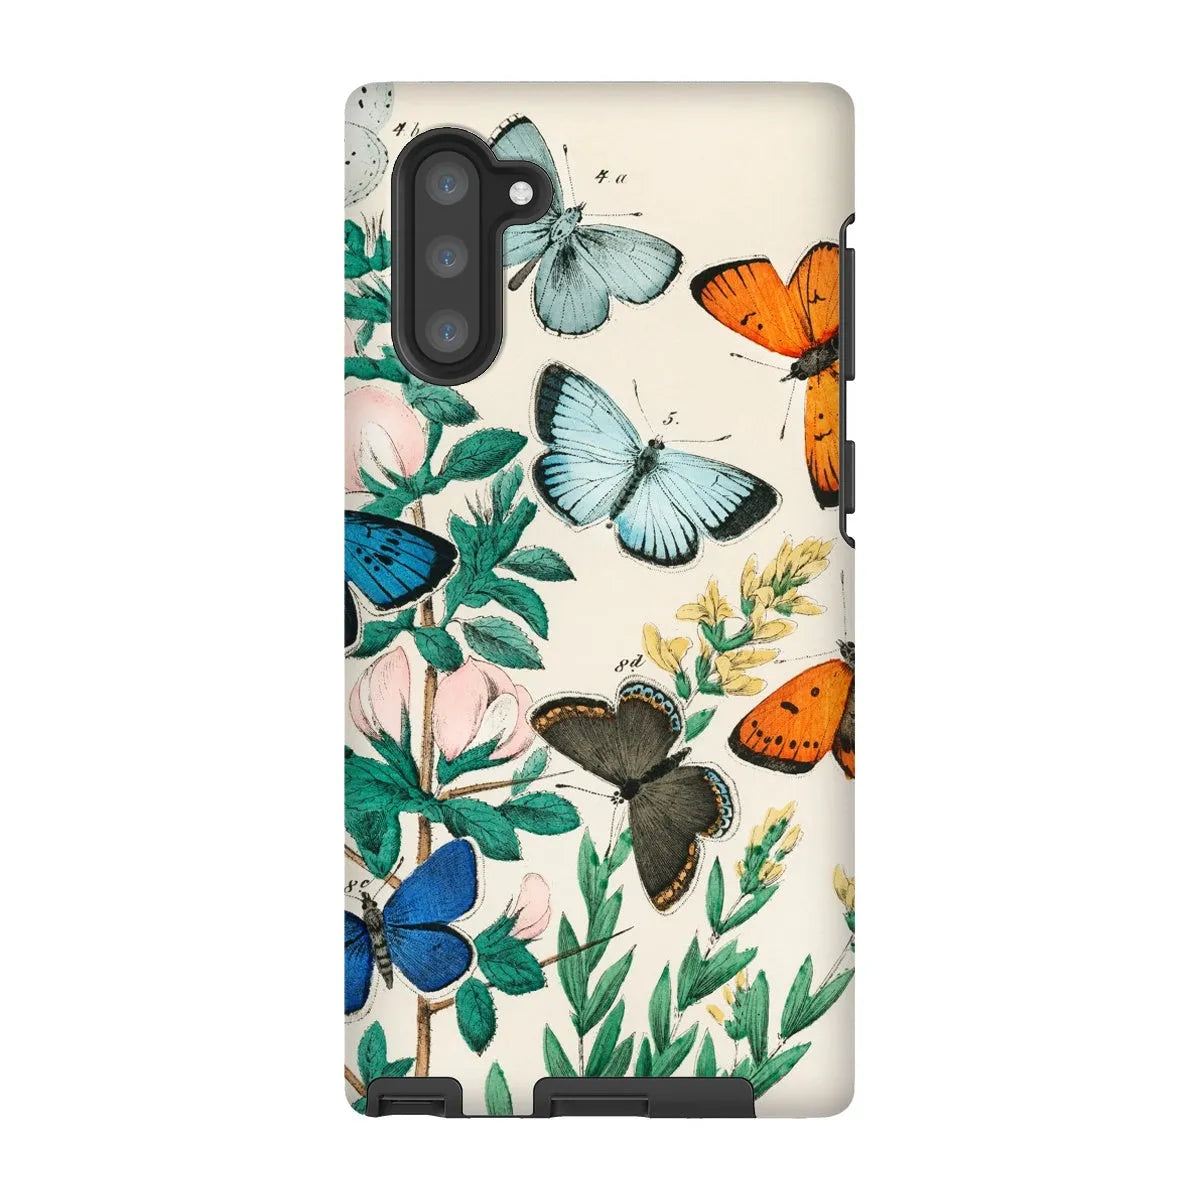 Another Butterfly Aesthetic Art Phone Case - William Forsell Kirby - Samsung Galaxy Note 10 / Matte - Mobile Phone